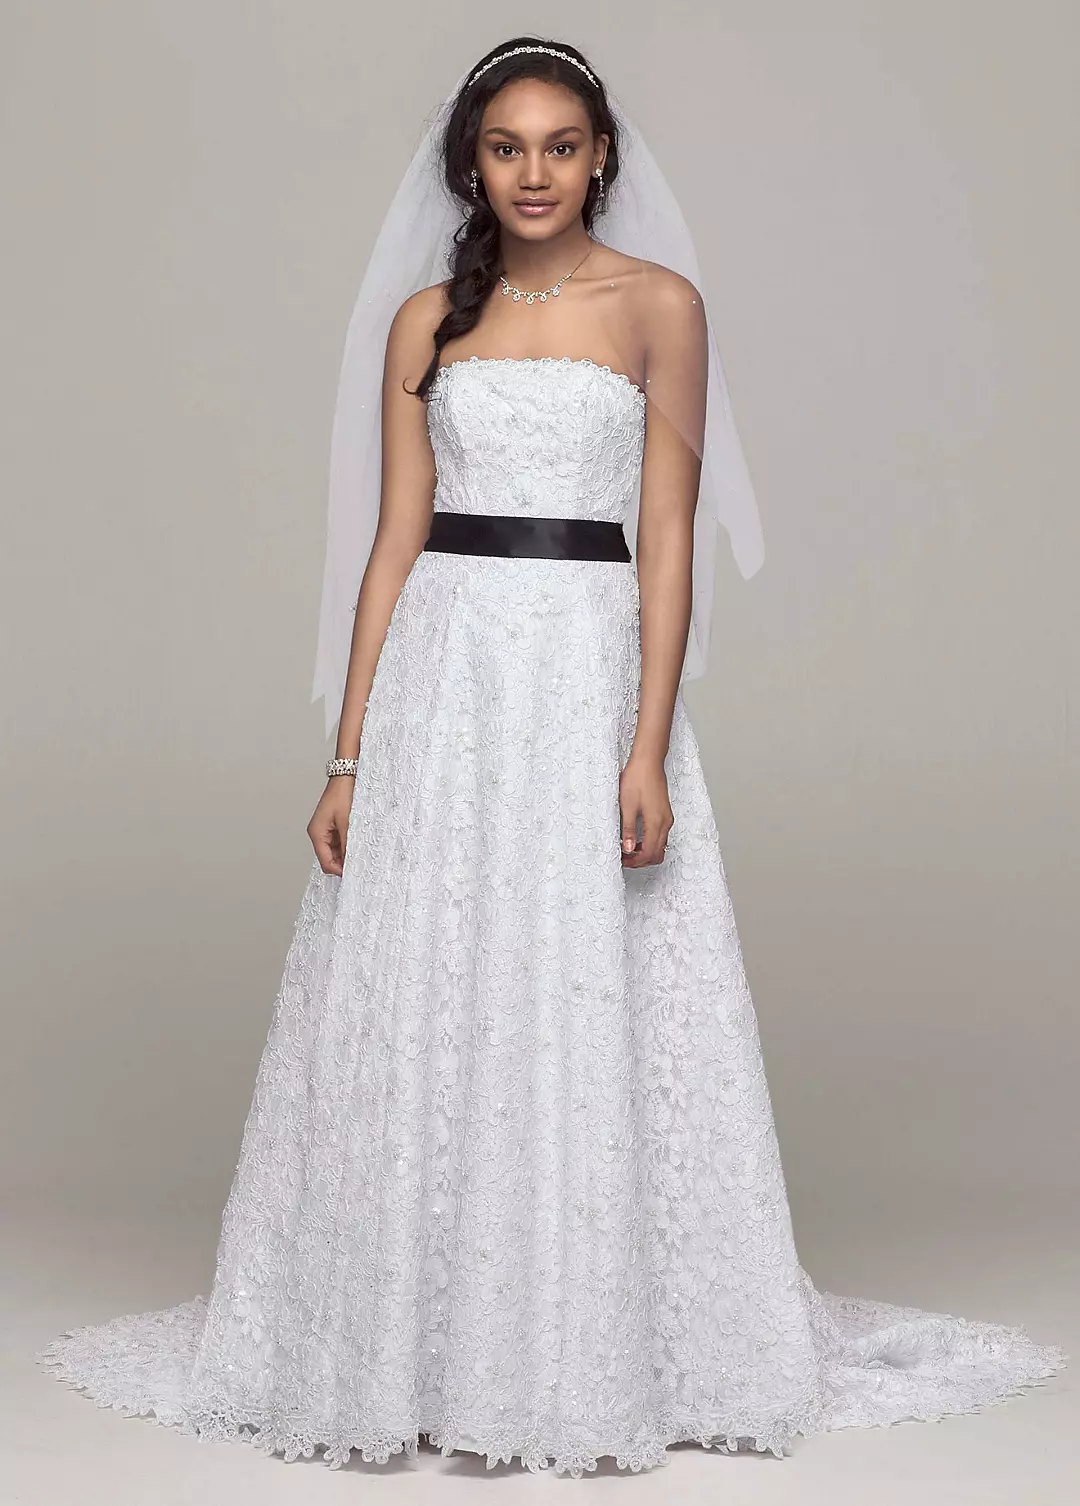 No Train All Over Beaded Corded Lace A-line Gown Image